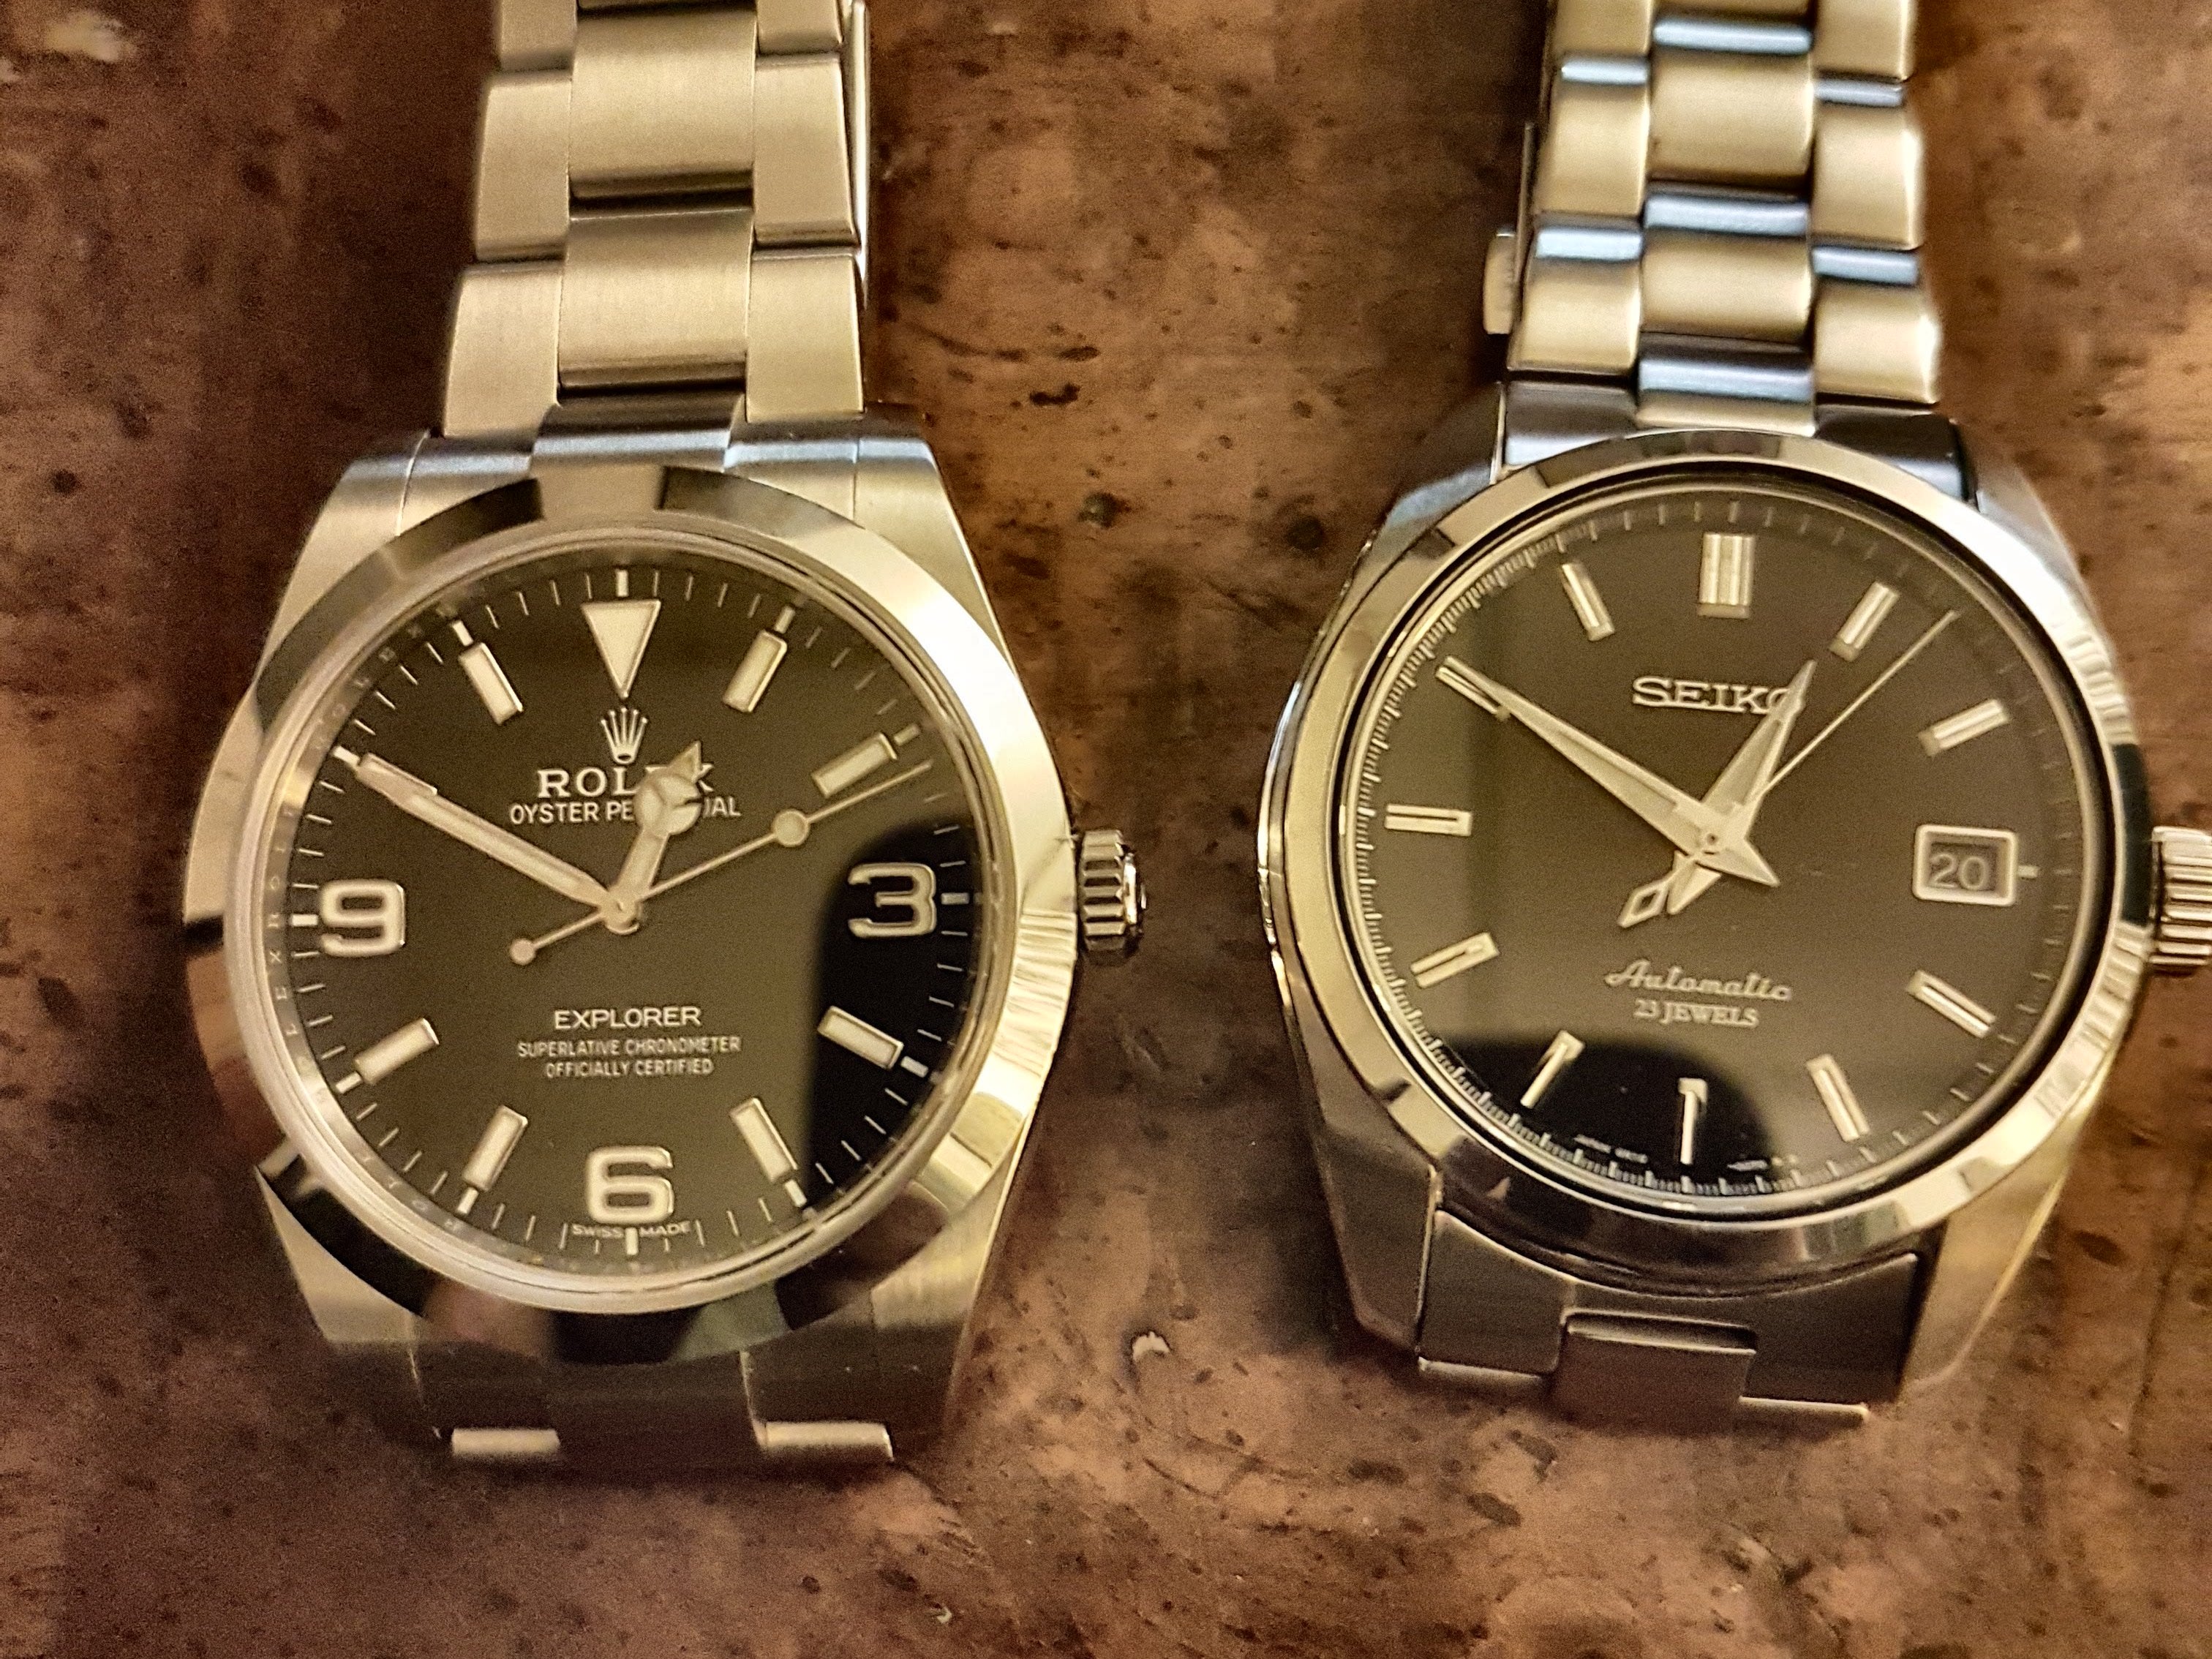 Own a SARB033, thinking hard about a black dial Rolex DateJust | WatchUSeek  Watch Forums